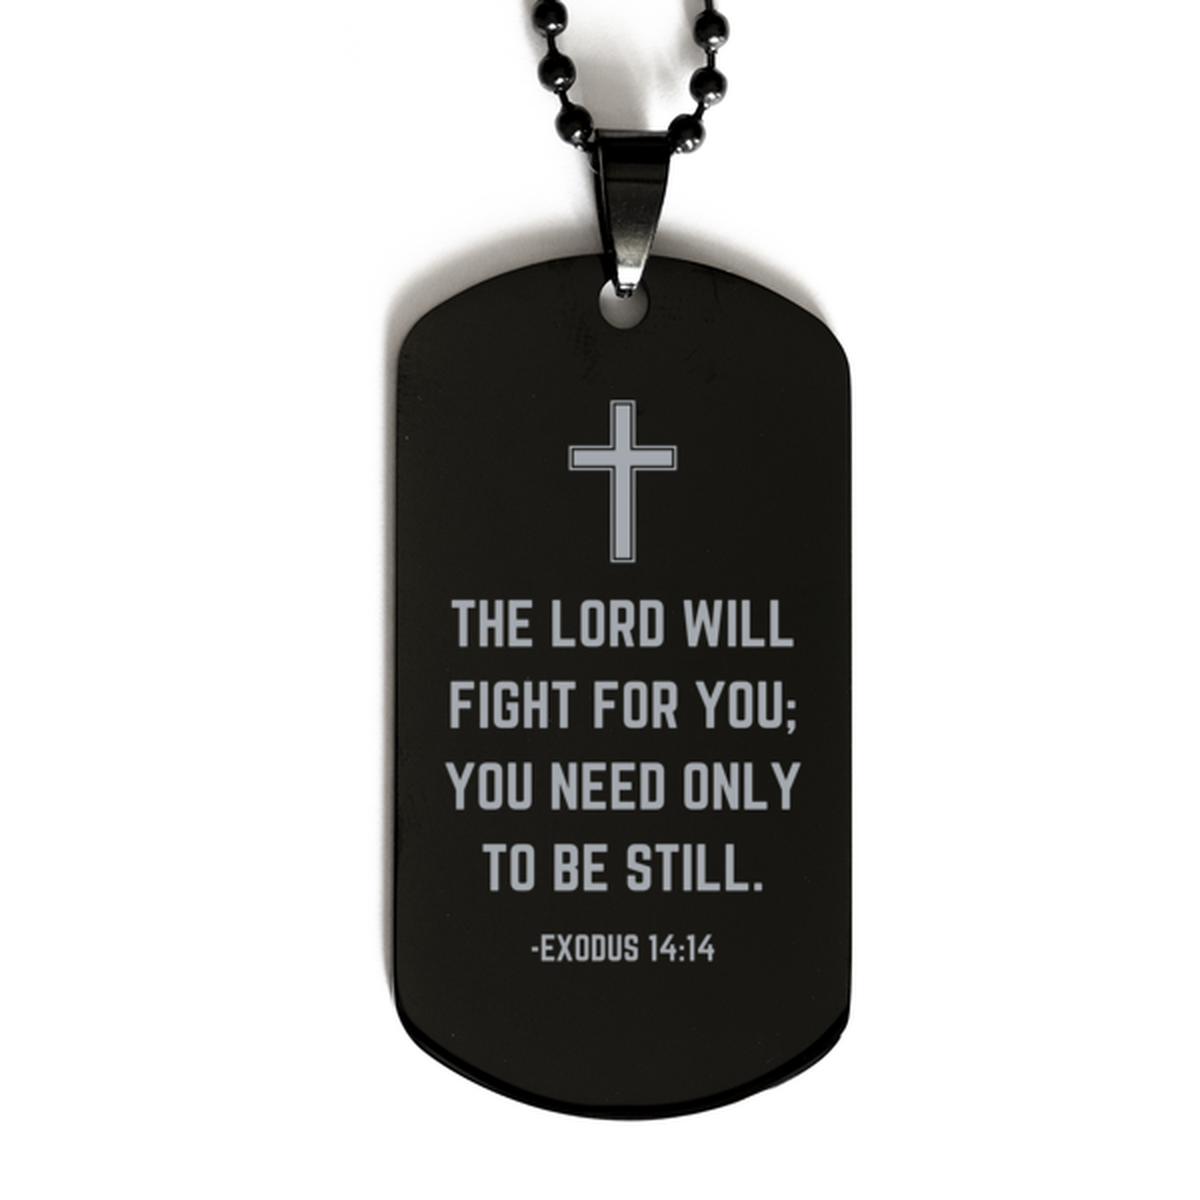 Baptism Gifts For Teenage Boys Girls, Christian Bible Verse Black Dog Tag, The Lord will fight for you, Confirmation Gifts, Bible Verse Necklace for Son, Godson, Grandson, Nephew